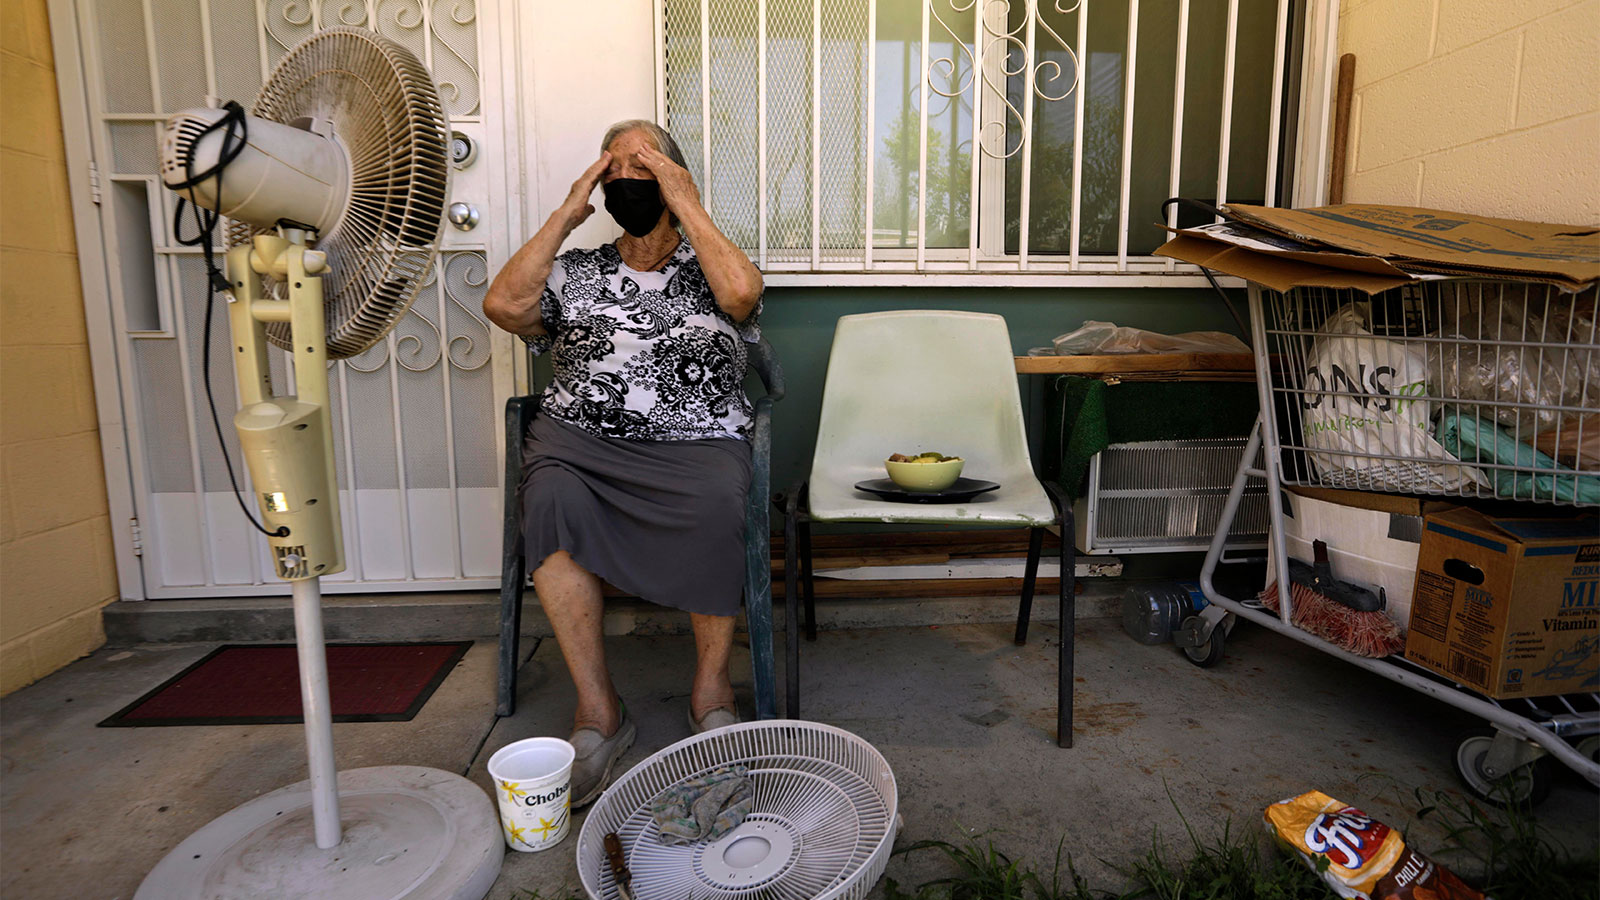 Felisa Benitez, an 86 year old woman, wipes the sweat from her brow while taking a break from cleaning her stand-up electrical fan on the porch of her home